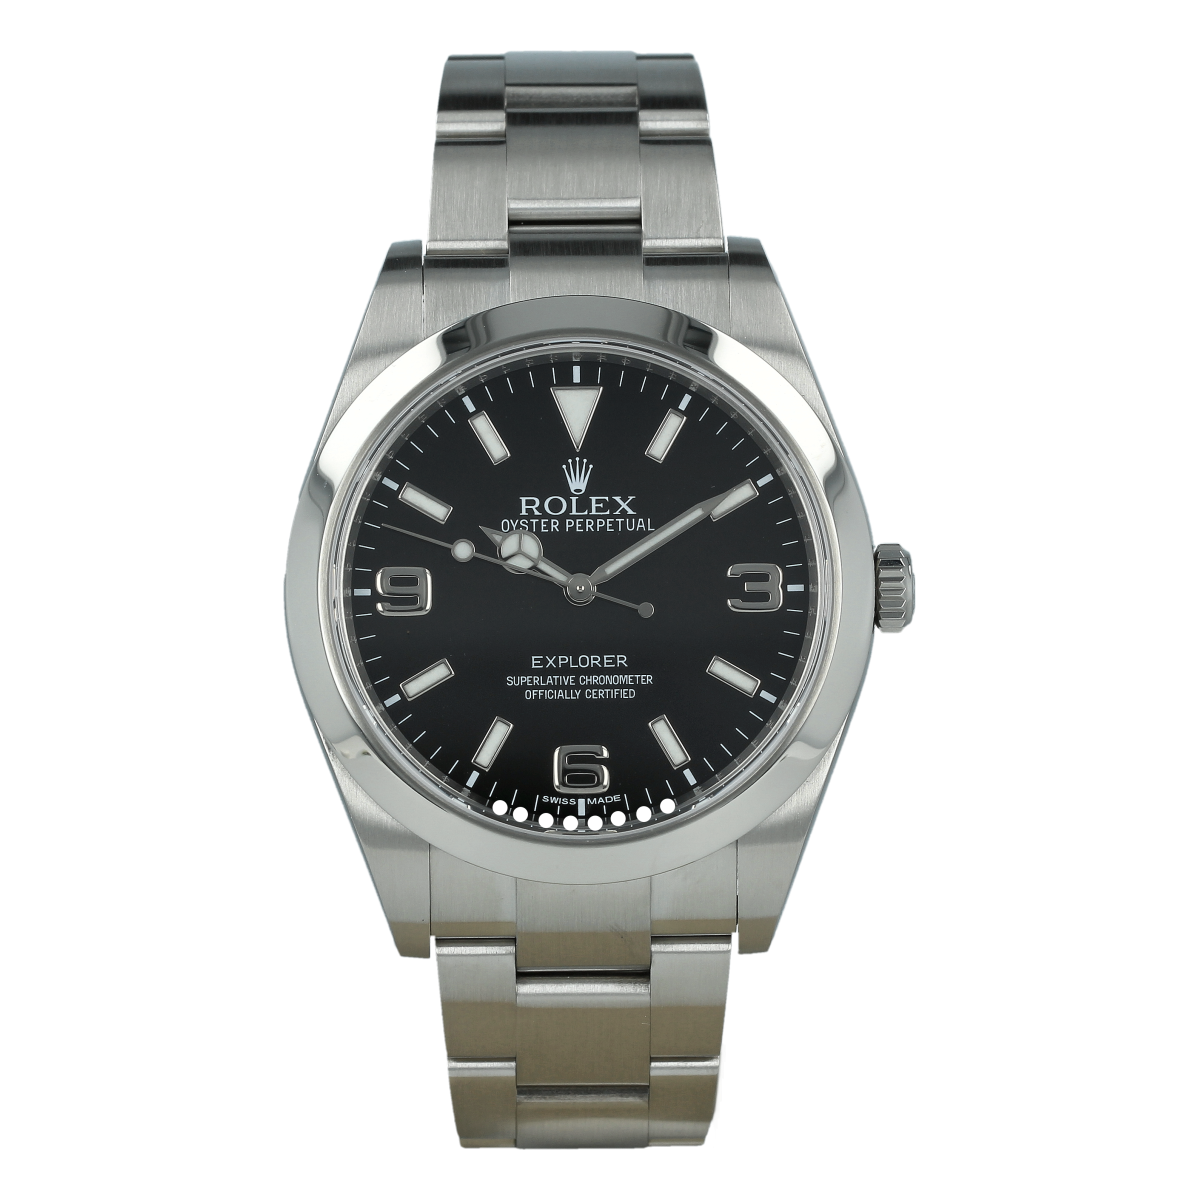 Buy pre-owned Rolex watch | AP Watches | Trading of watches from 